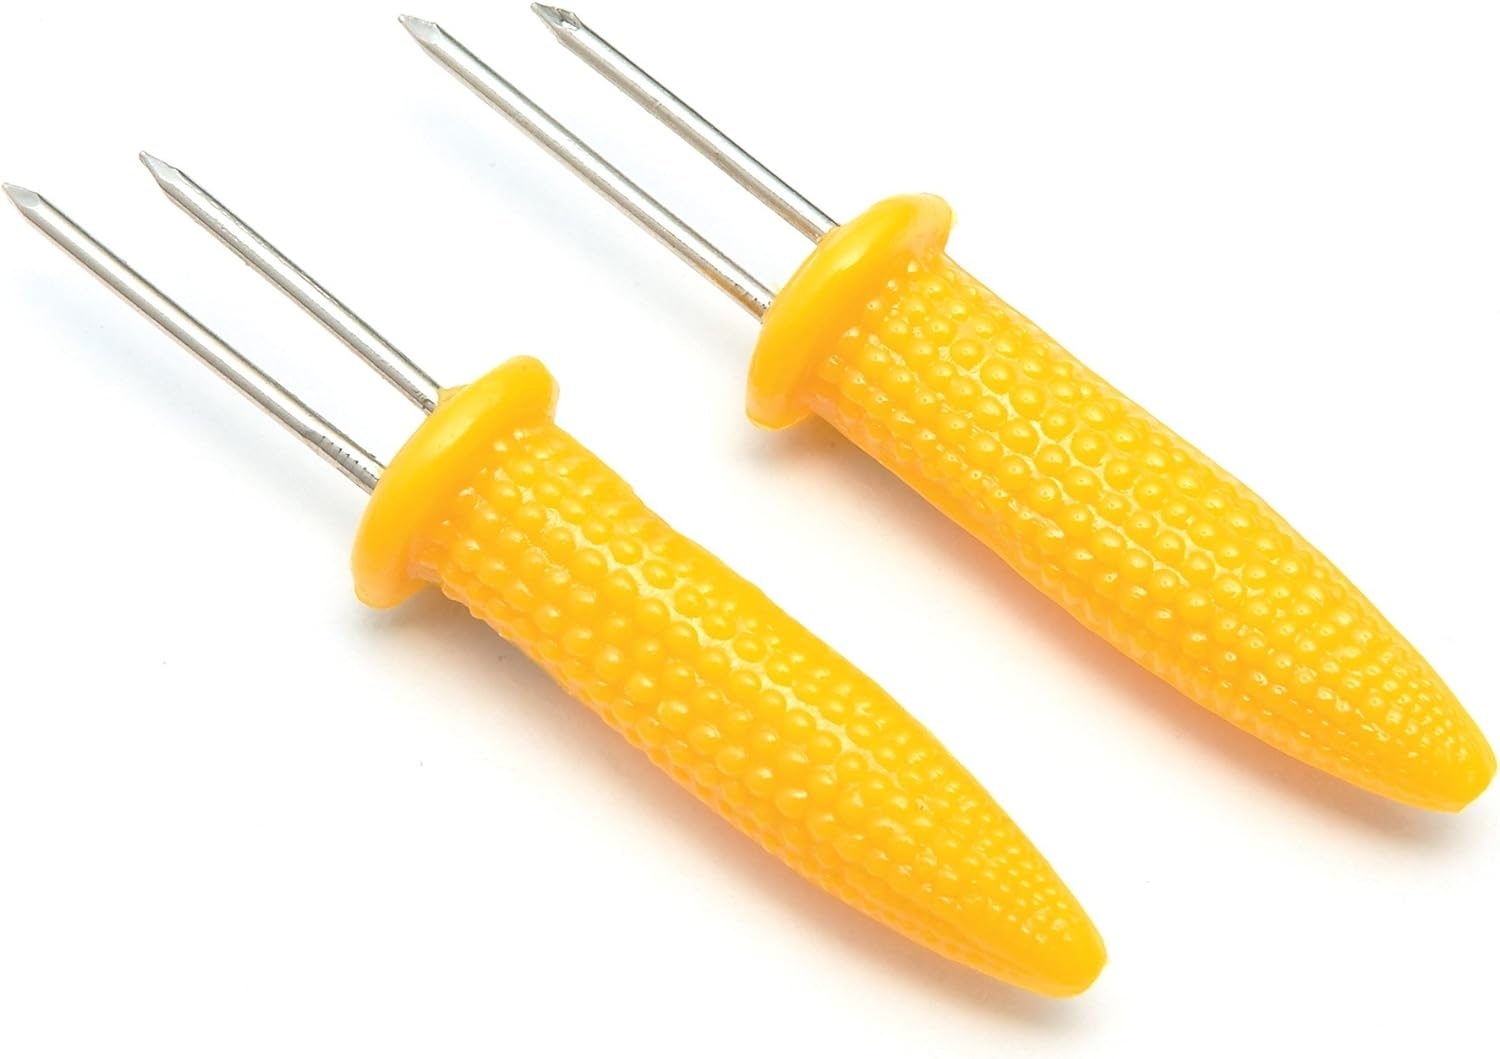 Two yellow plastic corn holders with metal prongs, isolated on a white background